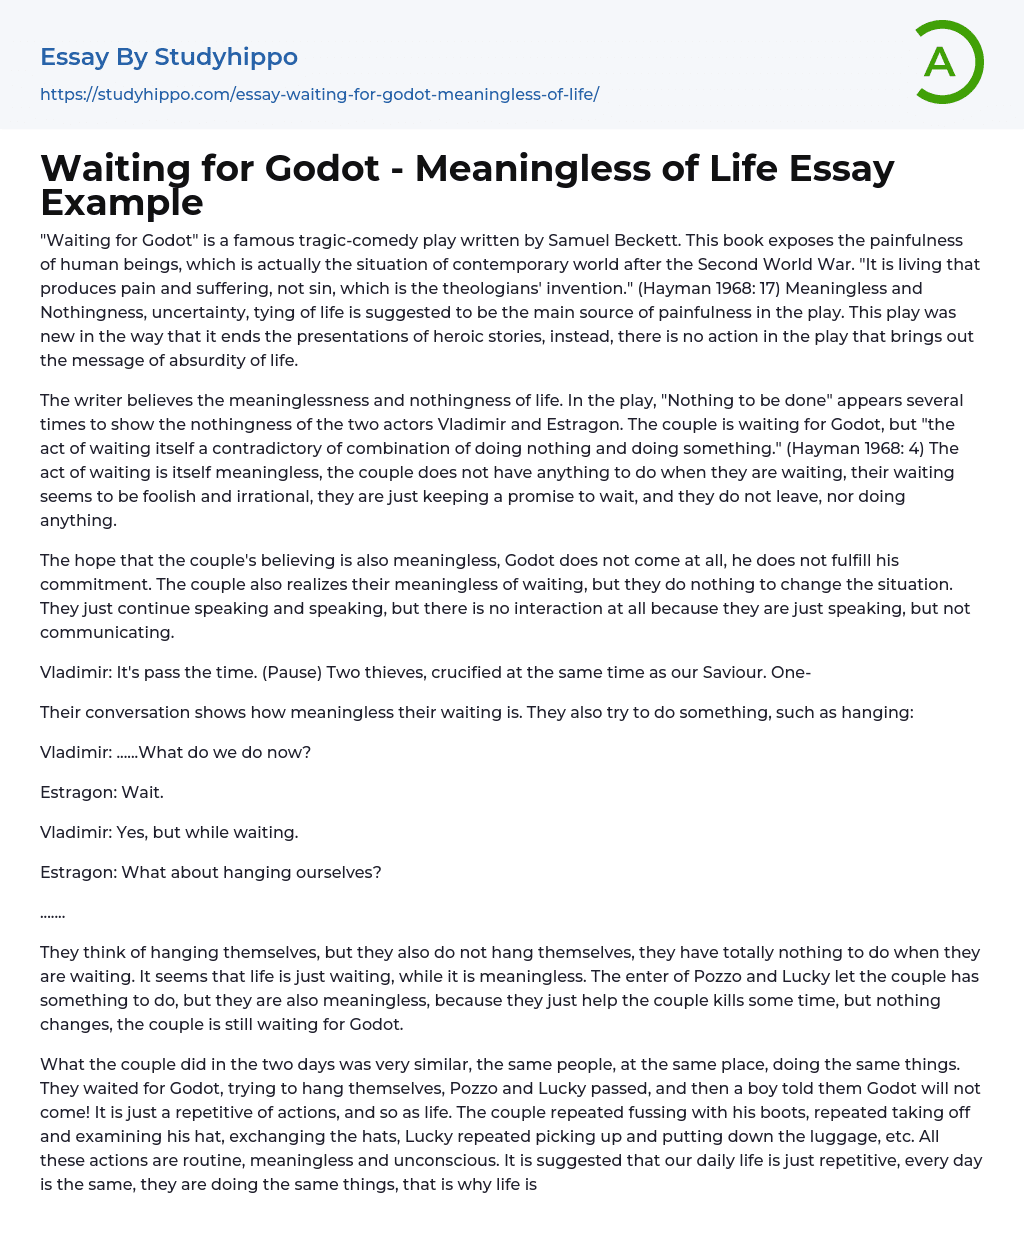 Waiting for Godot – Meaningless of Life Essay Example